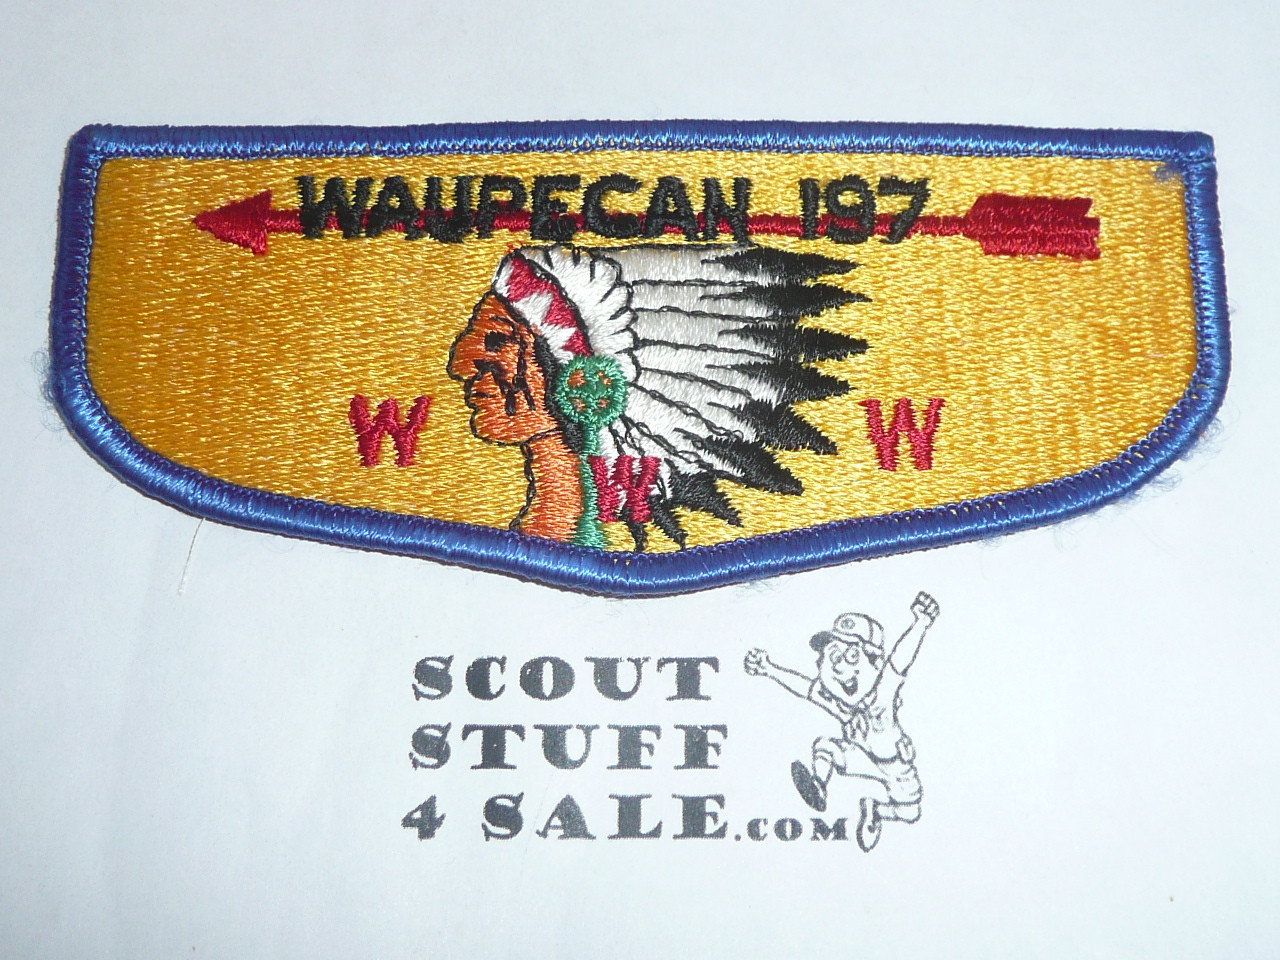 Order of the Arrow Lodge #197 Waupecan s7 Flap Patch